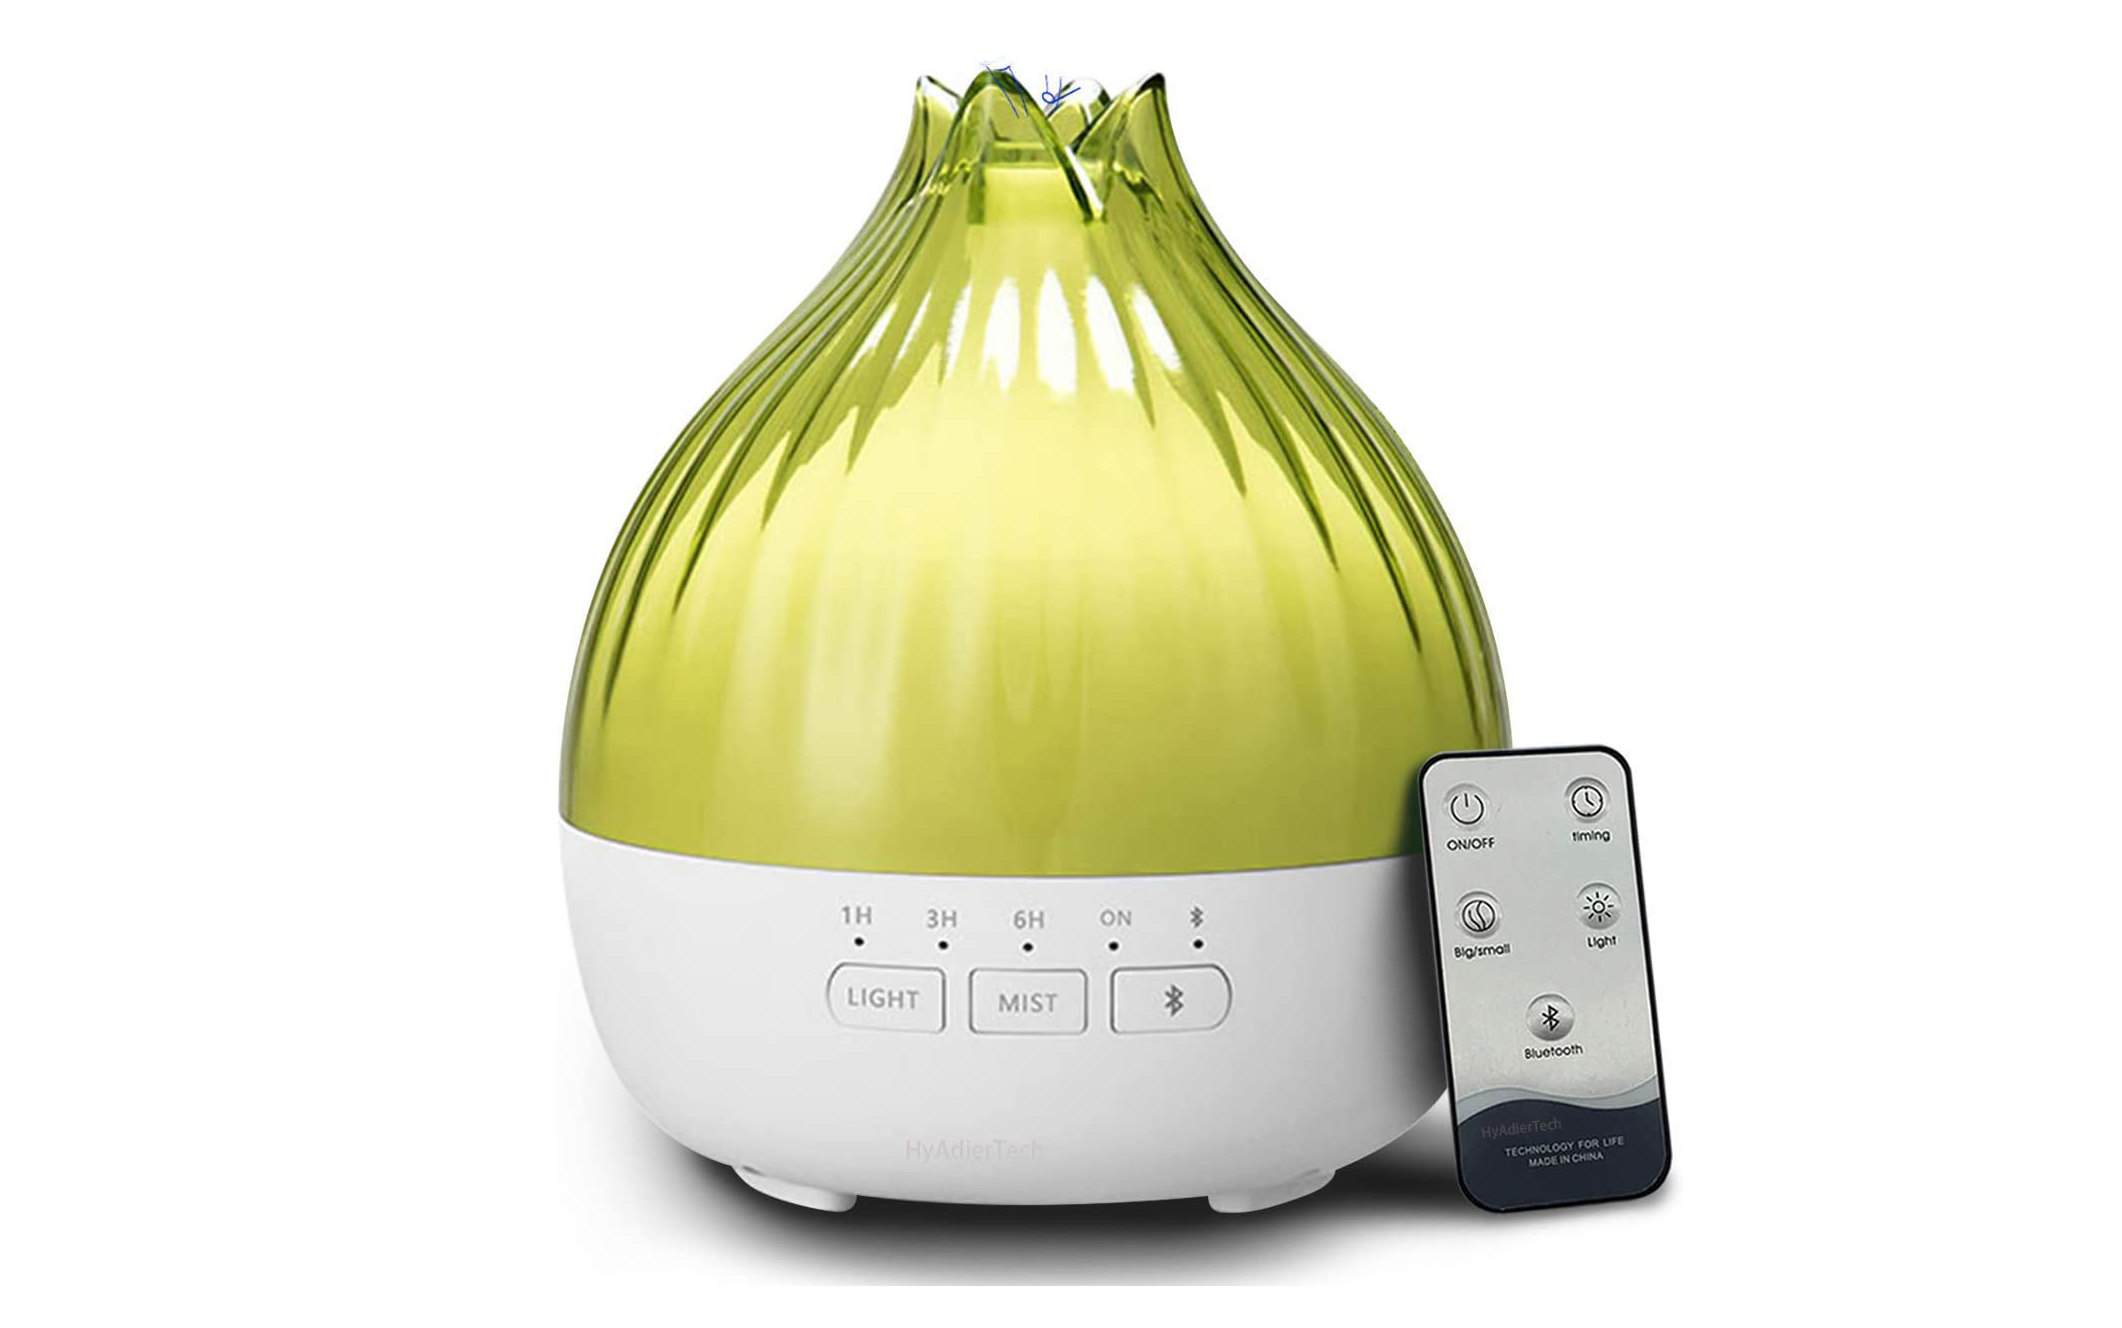 03 The essential oil diffuser with remote control and Bluetooth system